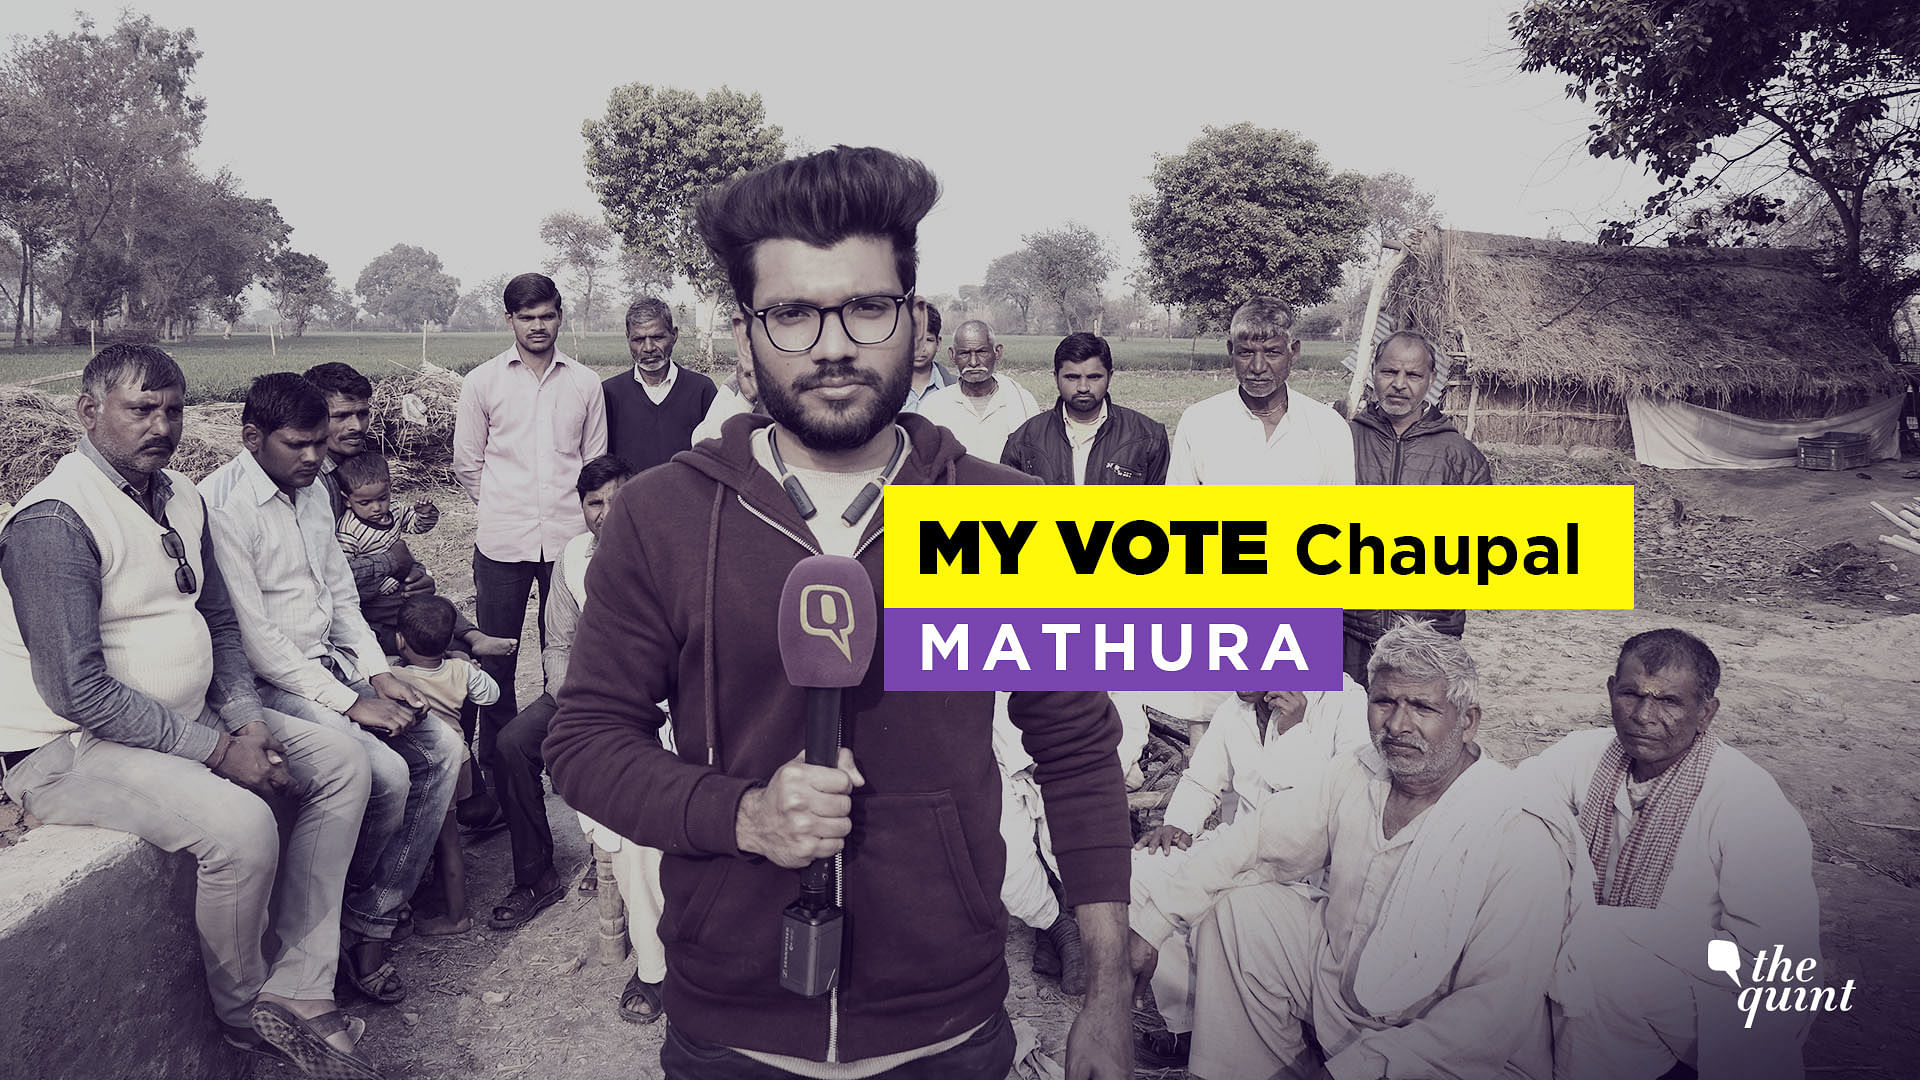 <b>The Quint</b> spoke to farmers in Mathura to understand the problems they face.